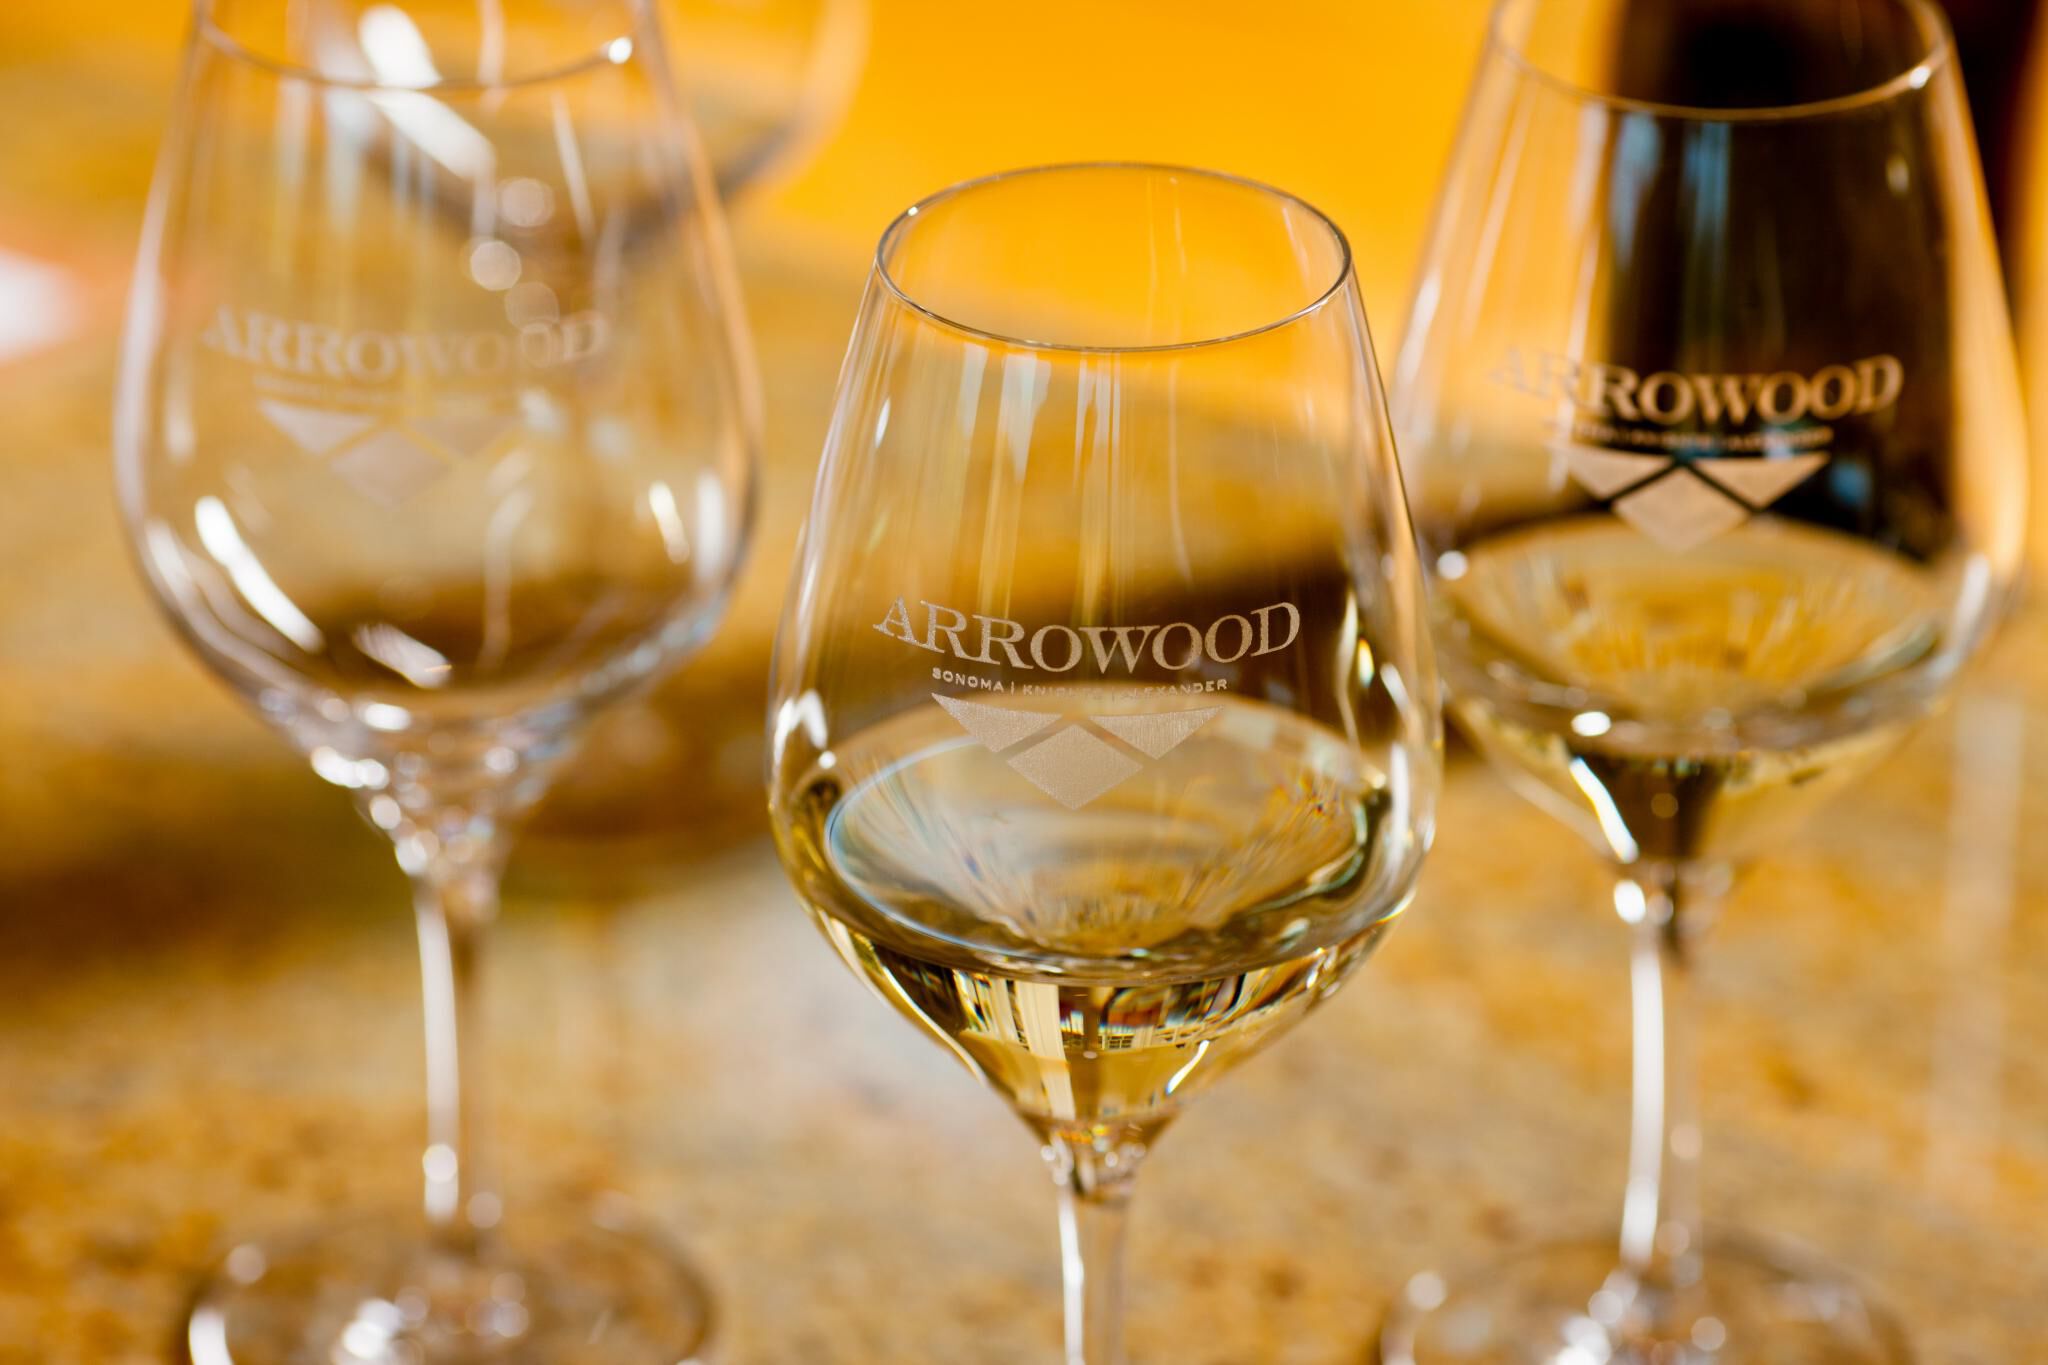 WHITE WINES - THE PERFECT CHARDONNAY